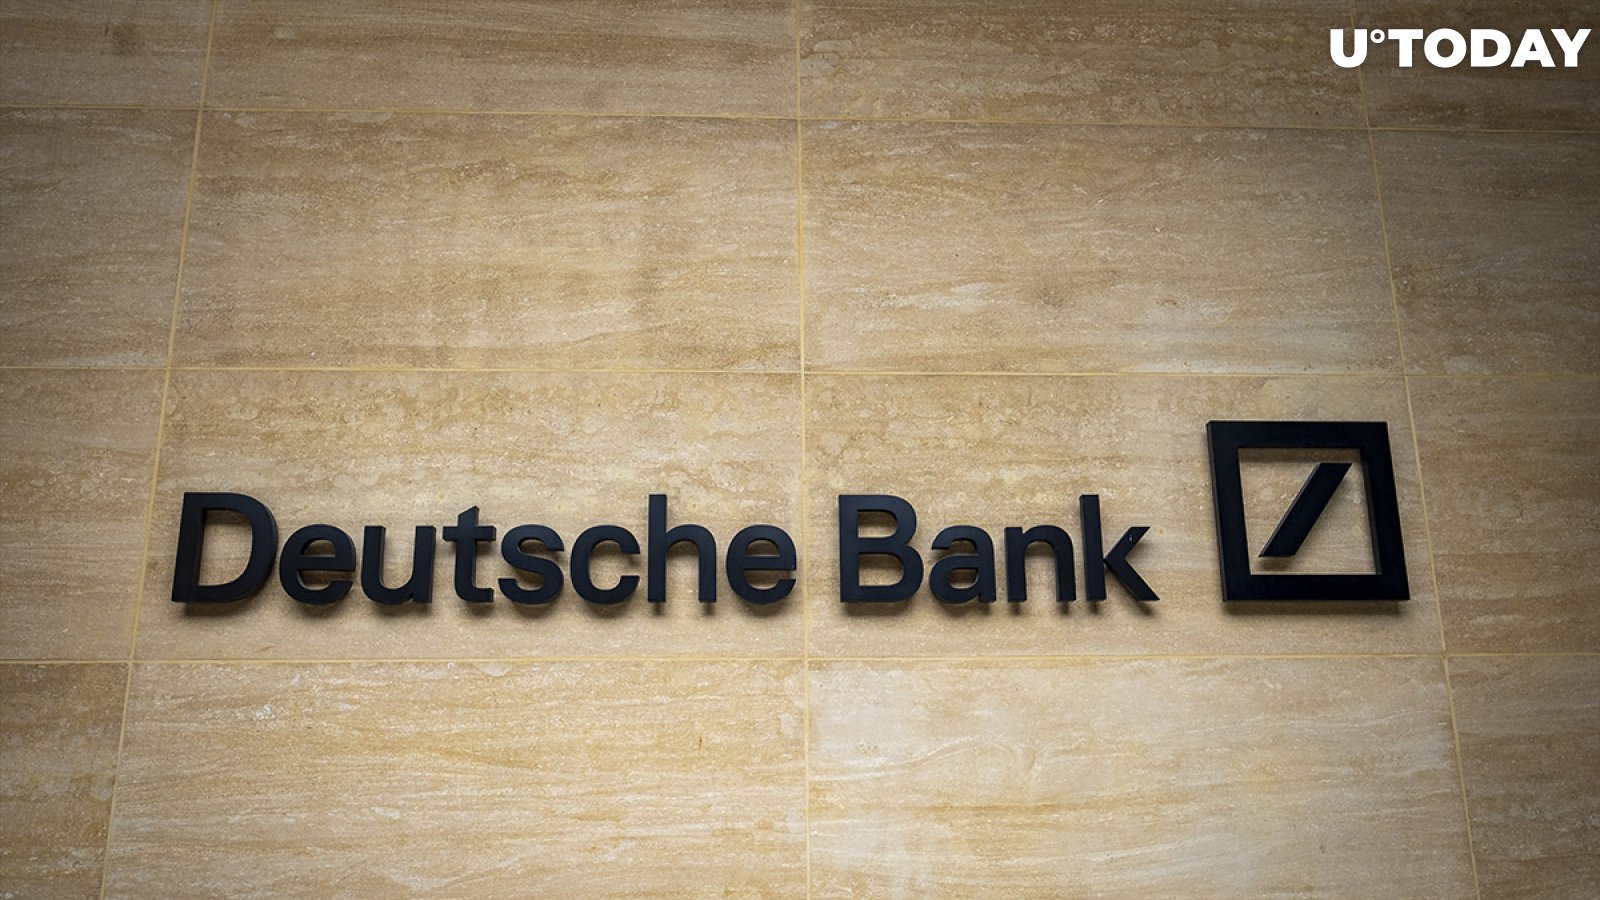 Deutsche Bank Says Bitcoin Is Now "Too Important To Ignore"